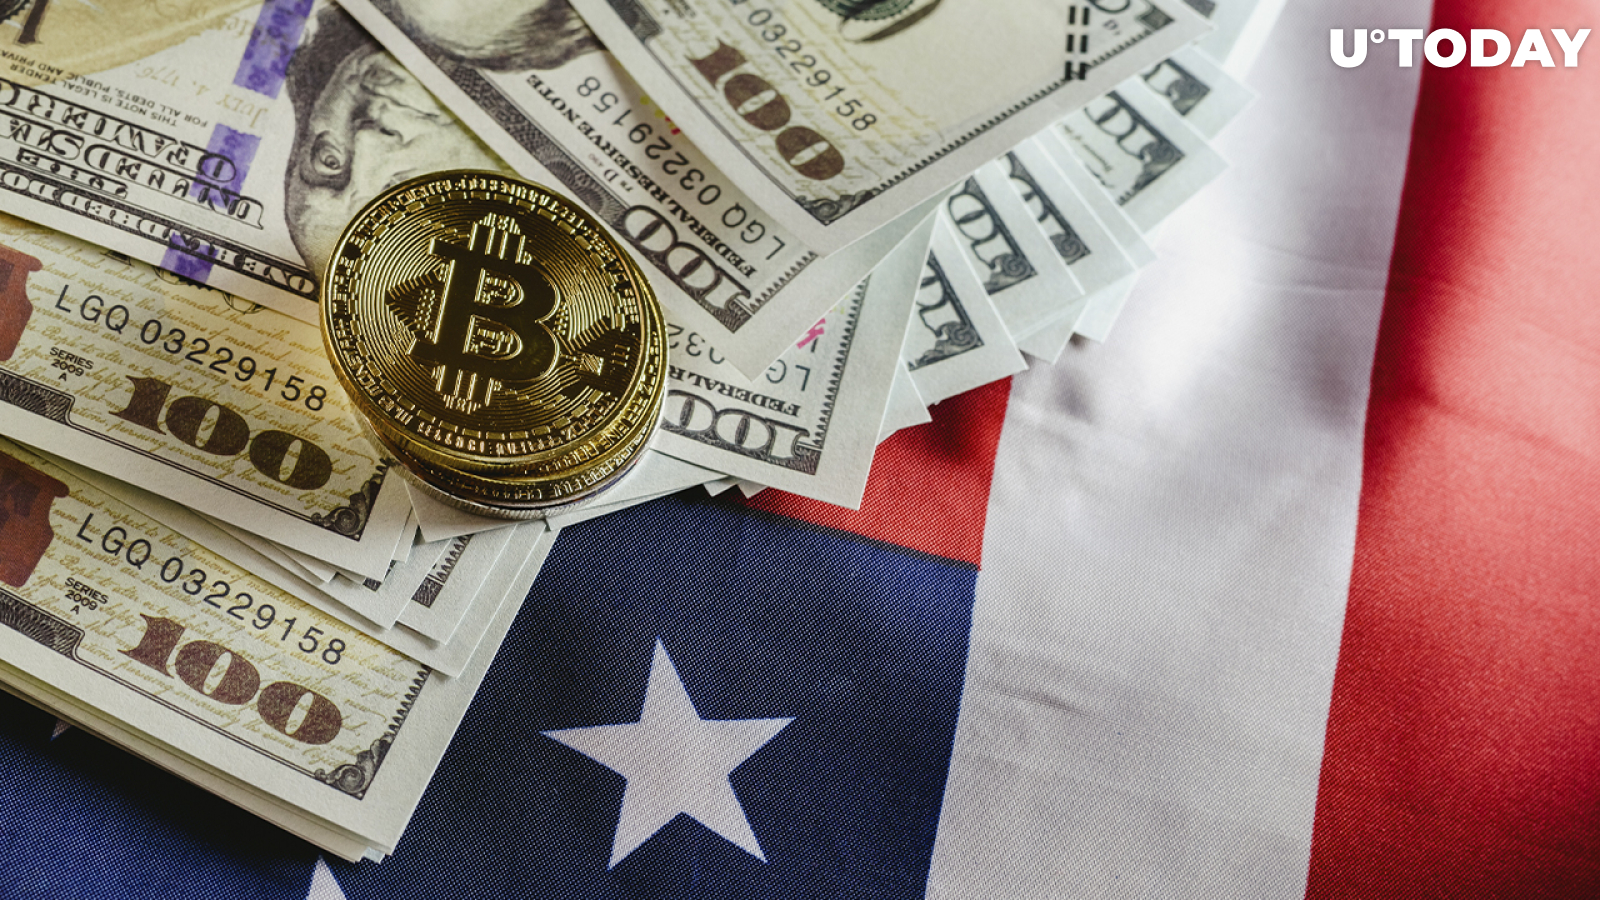 US Pro-Crypto Senators Own Bitcoin Themselves, Conflict of Interest Concerns Arise